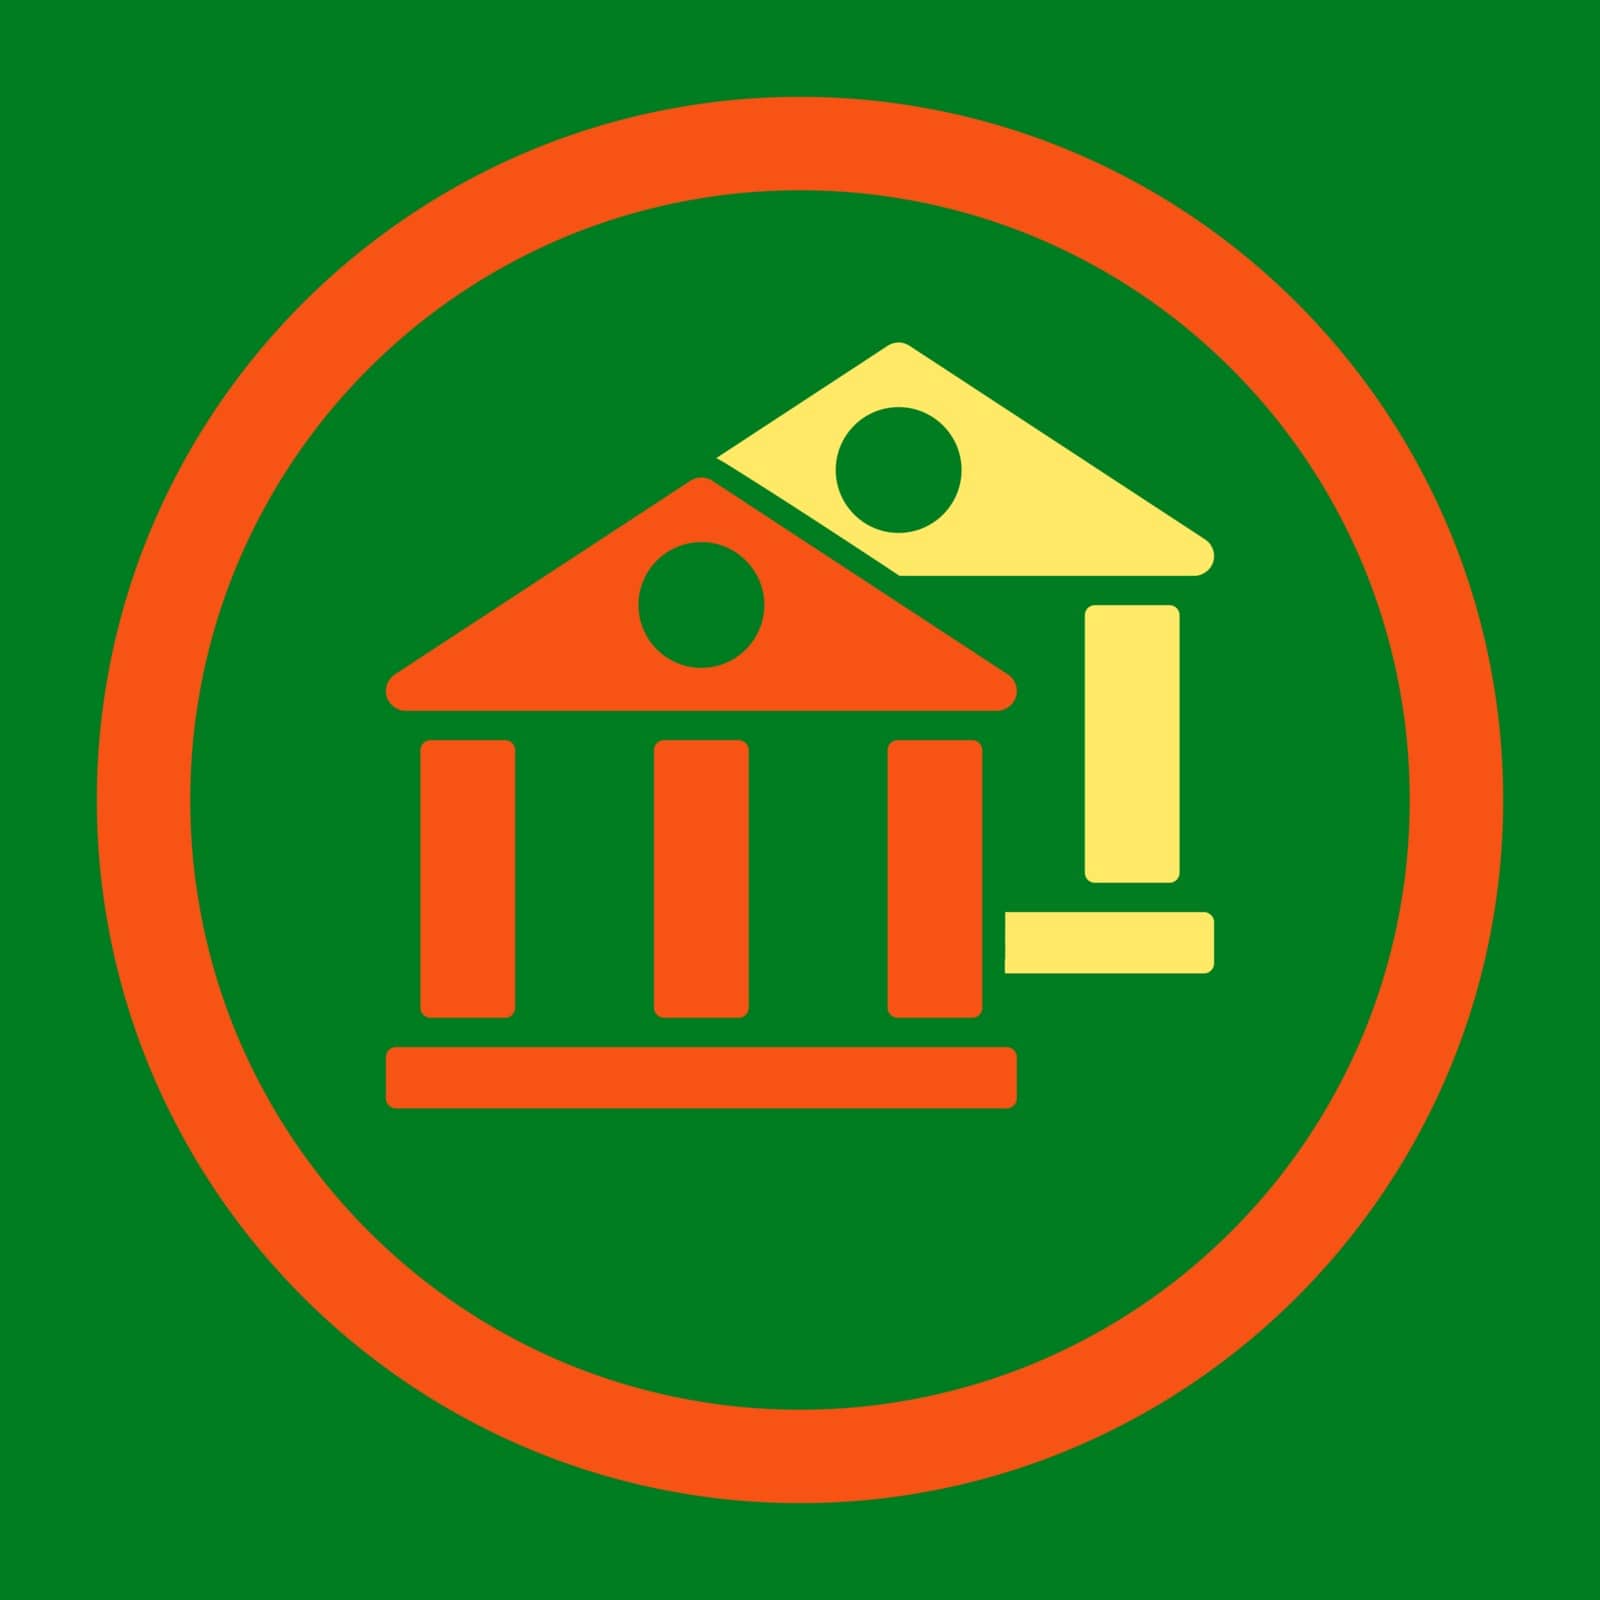 Banks vector icon. This flat rounded symbol uses orange and yellow colors and isolated on a green background.